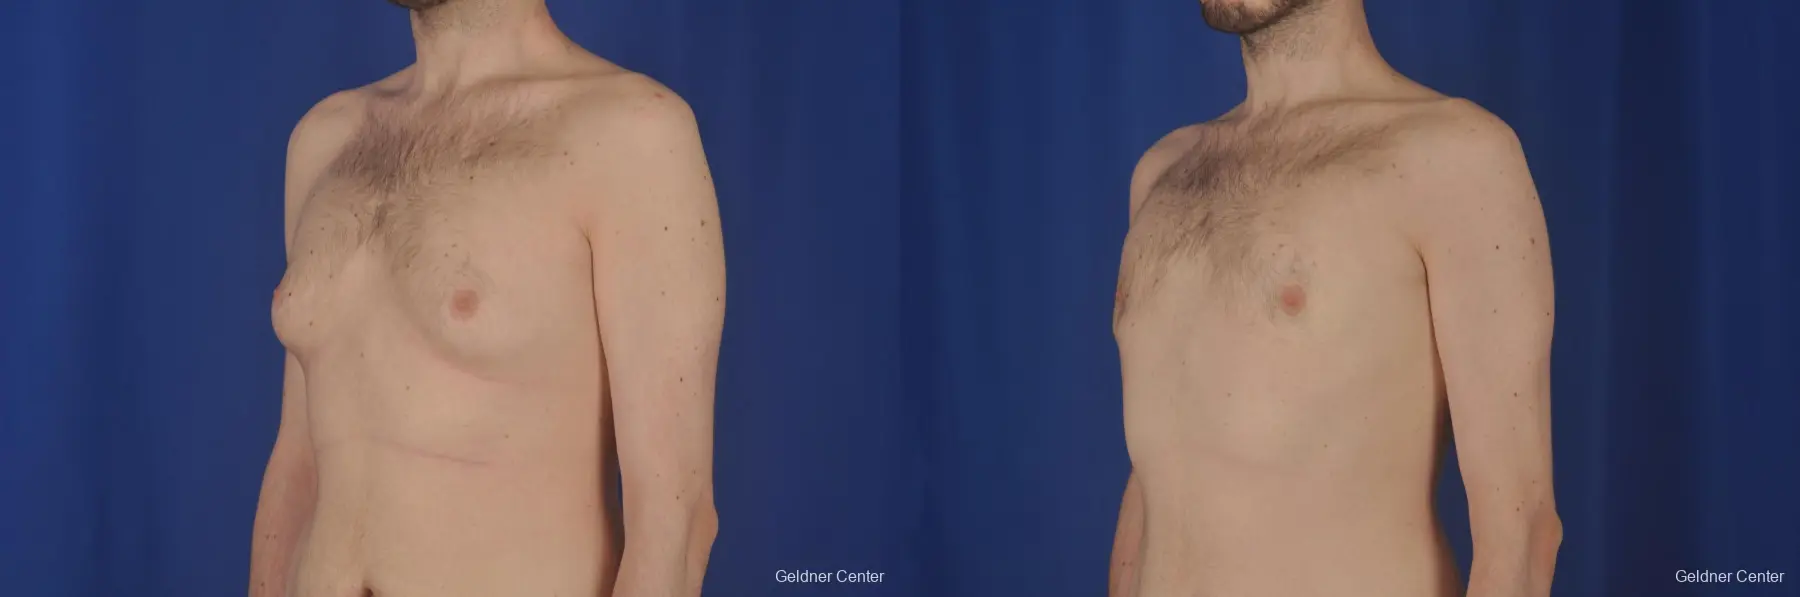 Gynecomastia: Patient 3 - Before and After 4